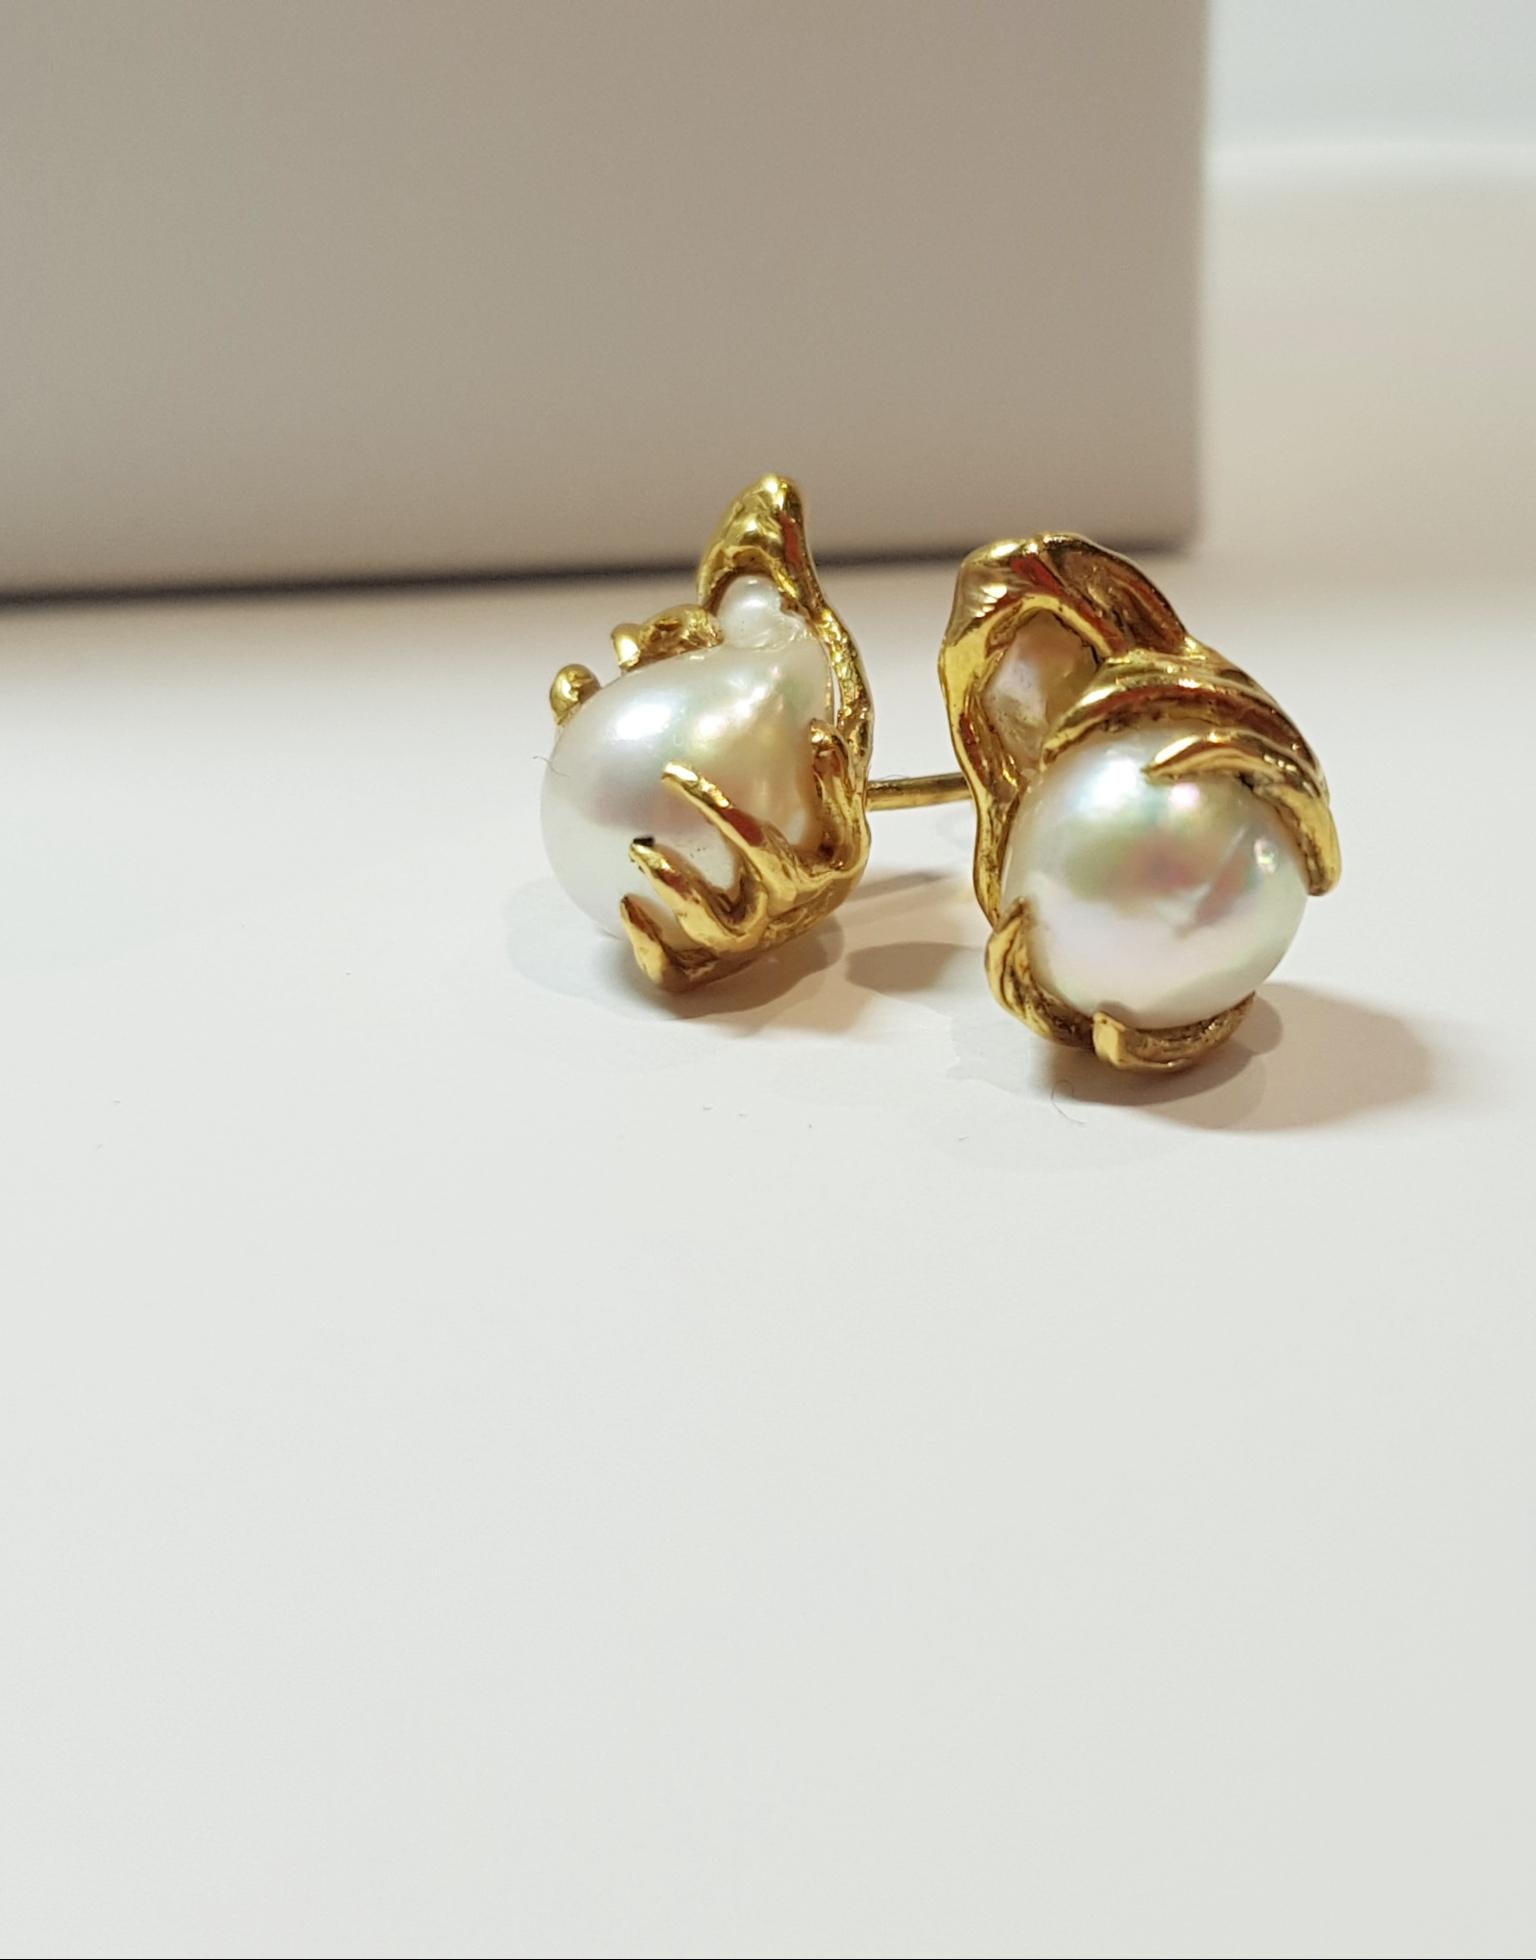 Handmade 18ct yellow gold baroque South sea pearl (7.2 x 10.1mm) stud earrings . 
At Euphoria Jewels ; we love to design and create unique one of a kind pieces ; delicate inspired by nature.
Every Euphoria Jewels item will arrive with a Certificate